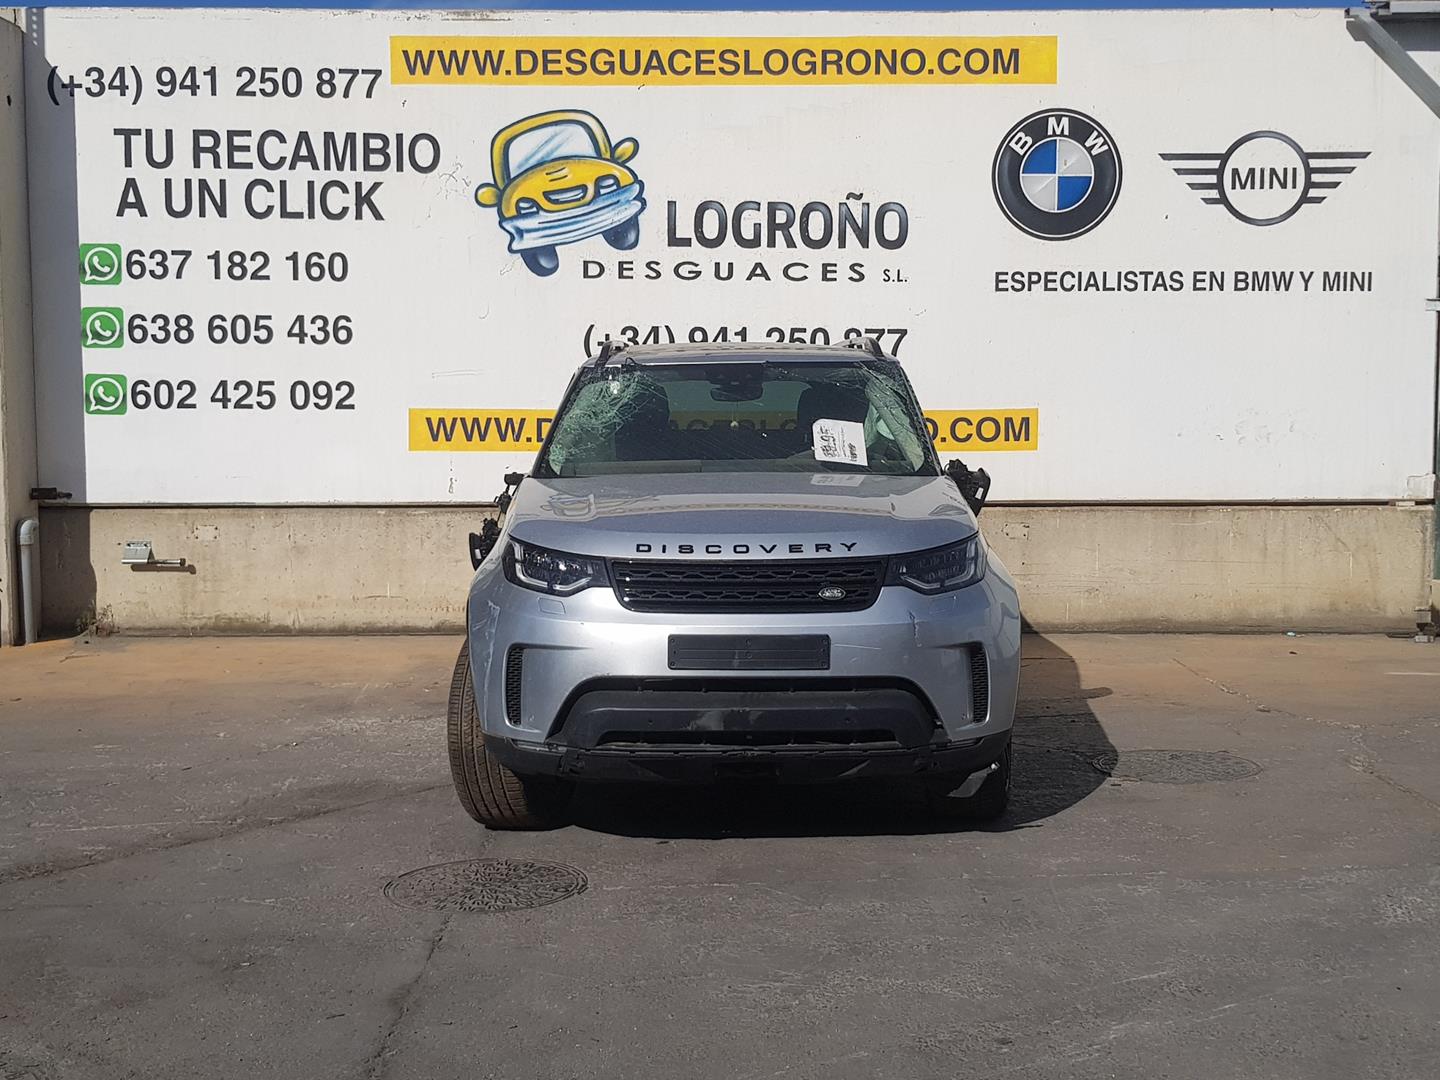 LAND ROVER Discovery 5 generation (2016-2024) шатун BIELA306DT, 306DT 24796971